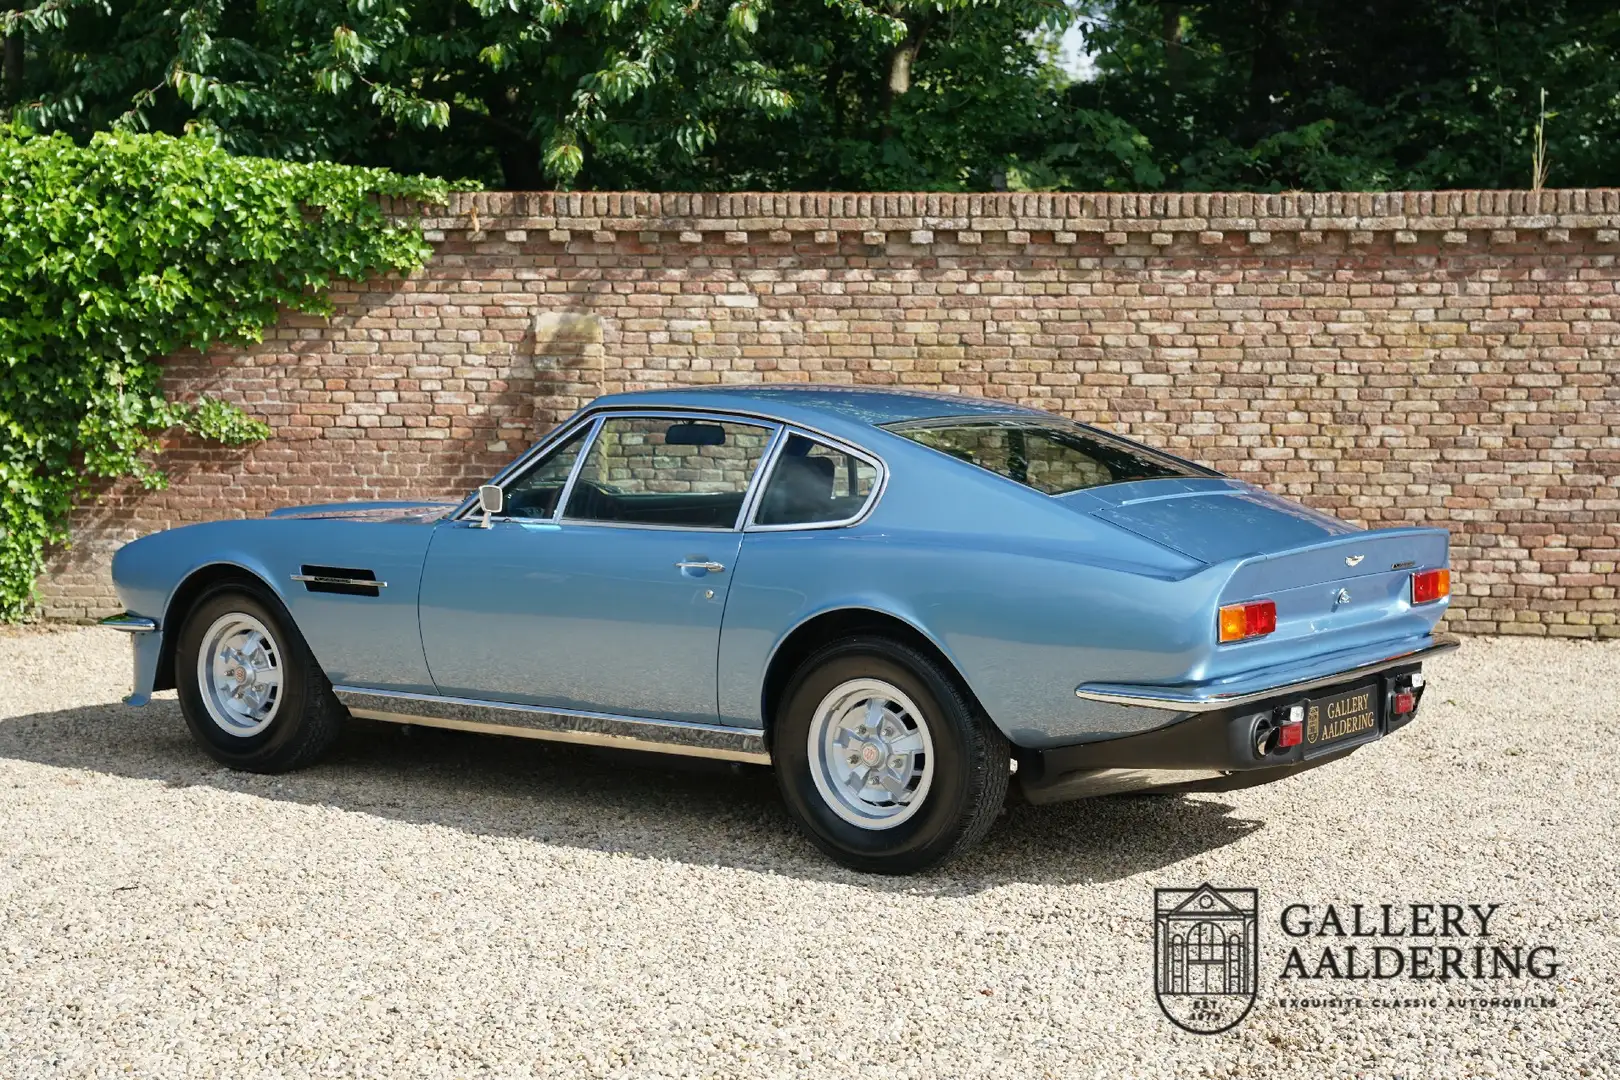 Aston Martin DBS Rare and sought after manual gearbox version with Blau - 2